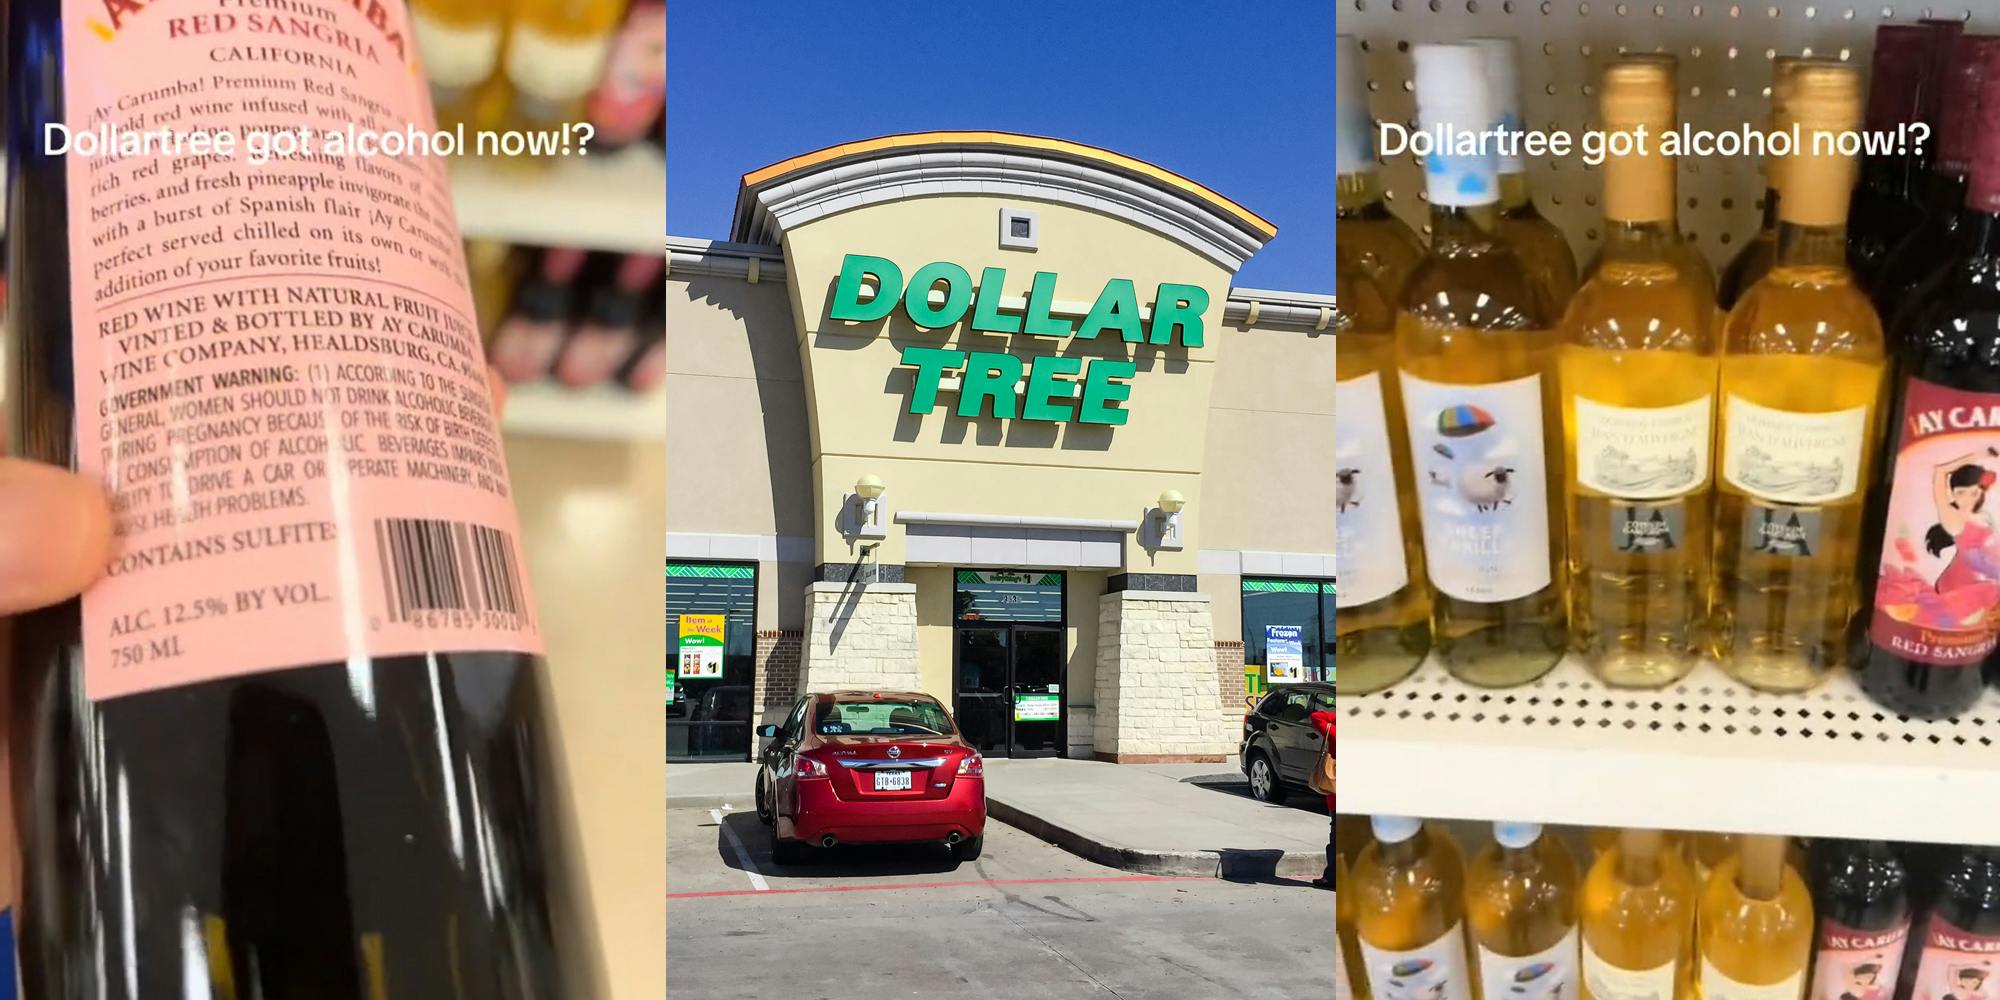 customer holding sangria at Dollar Tree with caption "Dollar tree got alcohol now?" (l) Dollar Tree building with sign (c) alcohol display in Dollar Tree caption "Dollar tree got alcohol now?" (r)